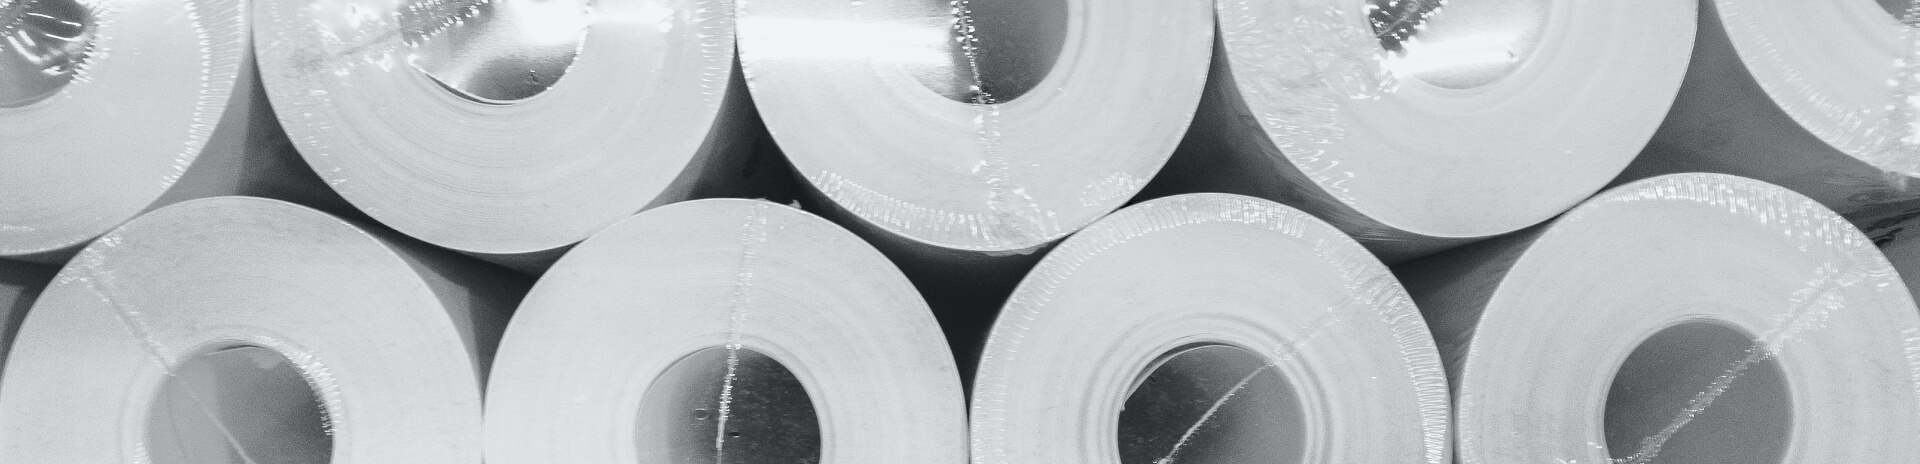 several rolls of toilet paper are stacked on top of each other